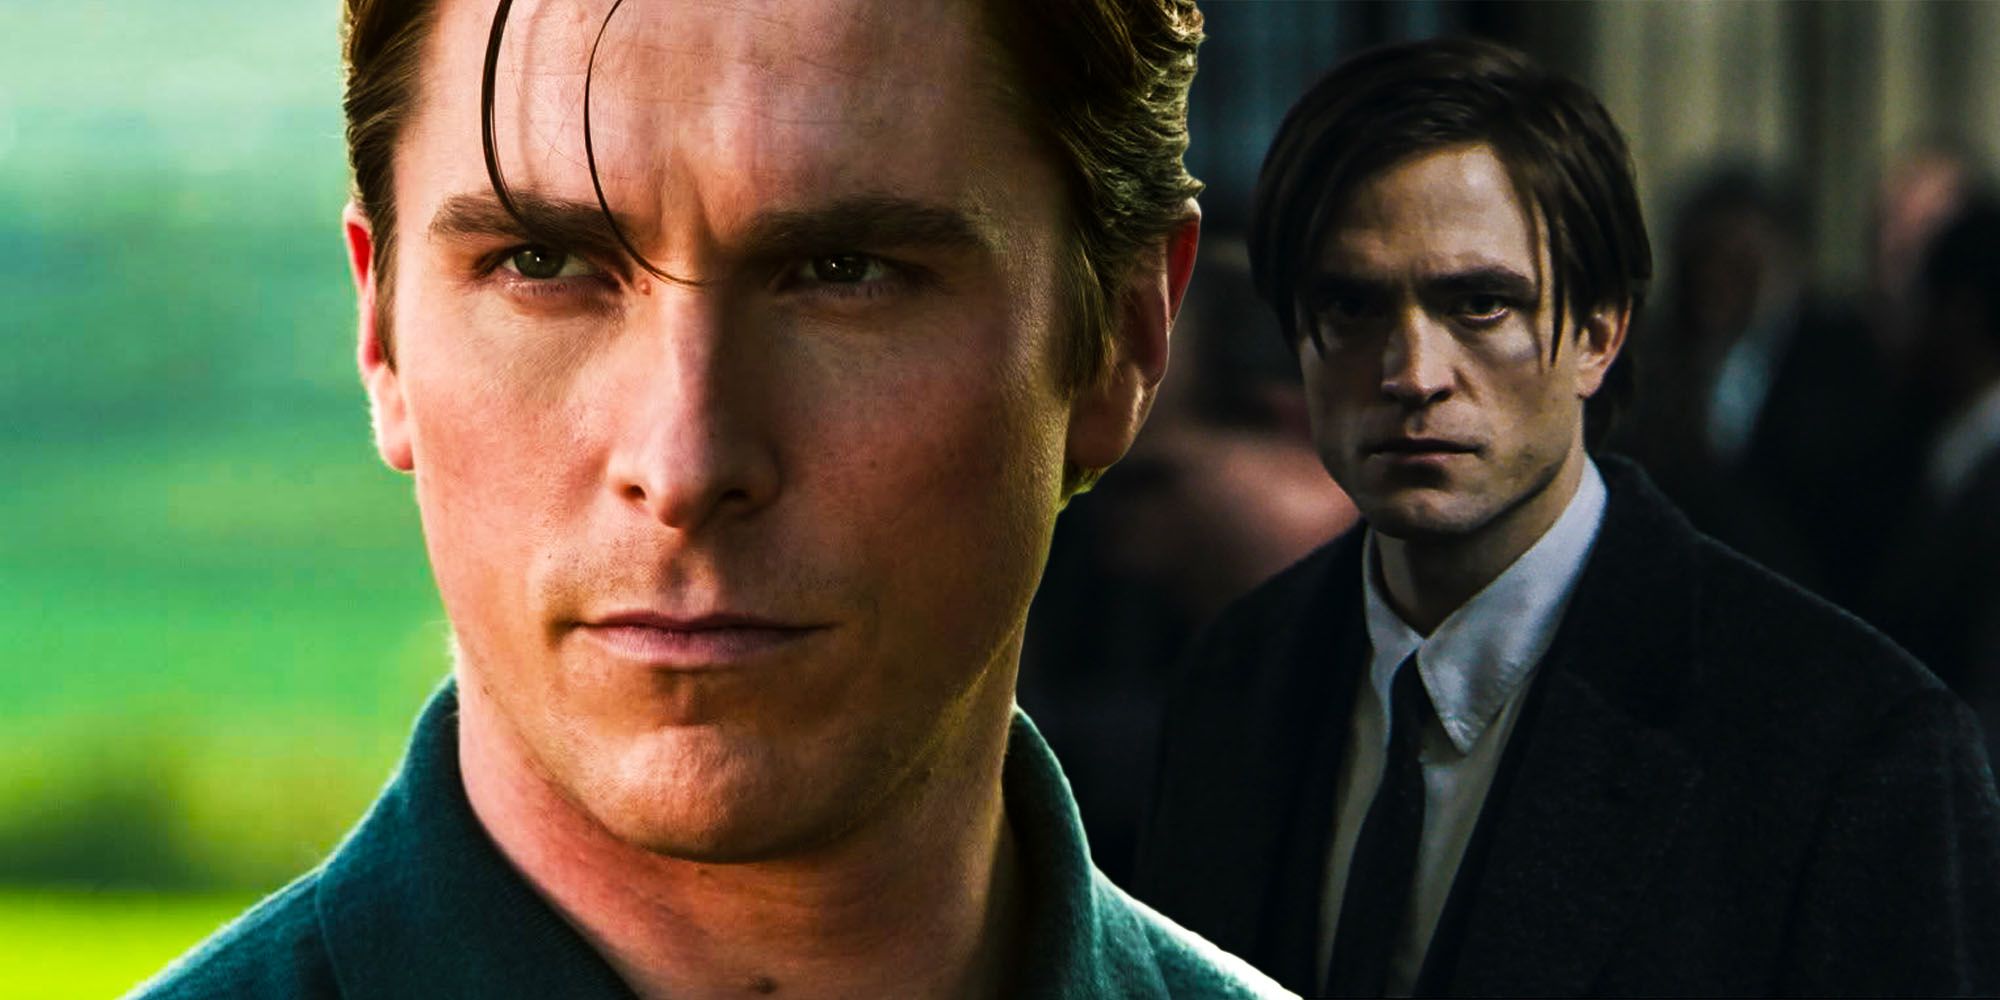 The Batman How Pattinson’s Salary Compares To Bale For Batman Begins